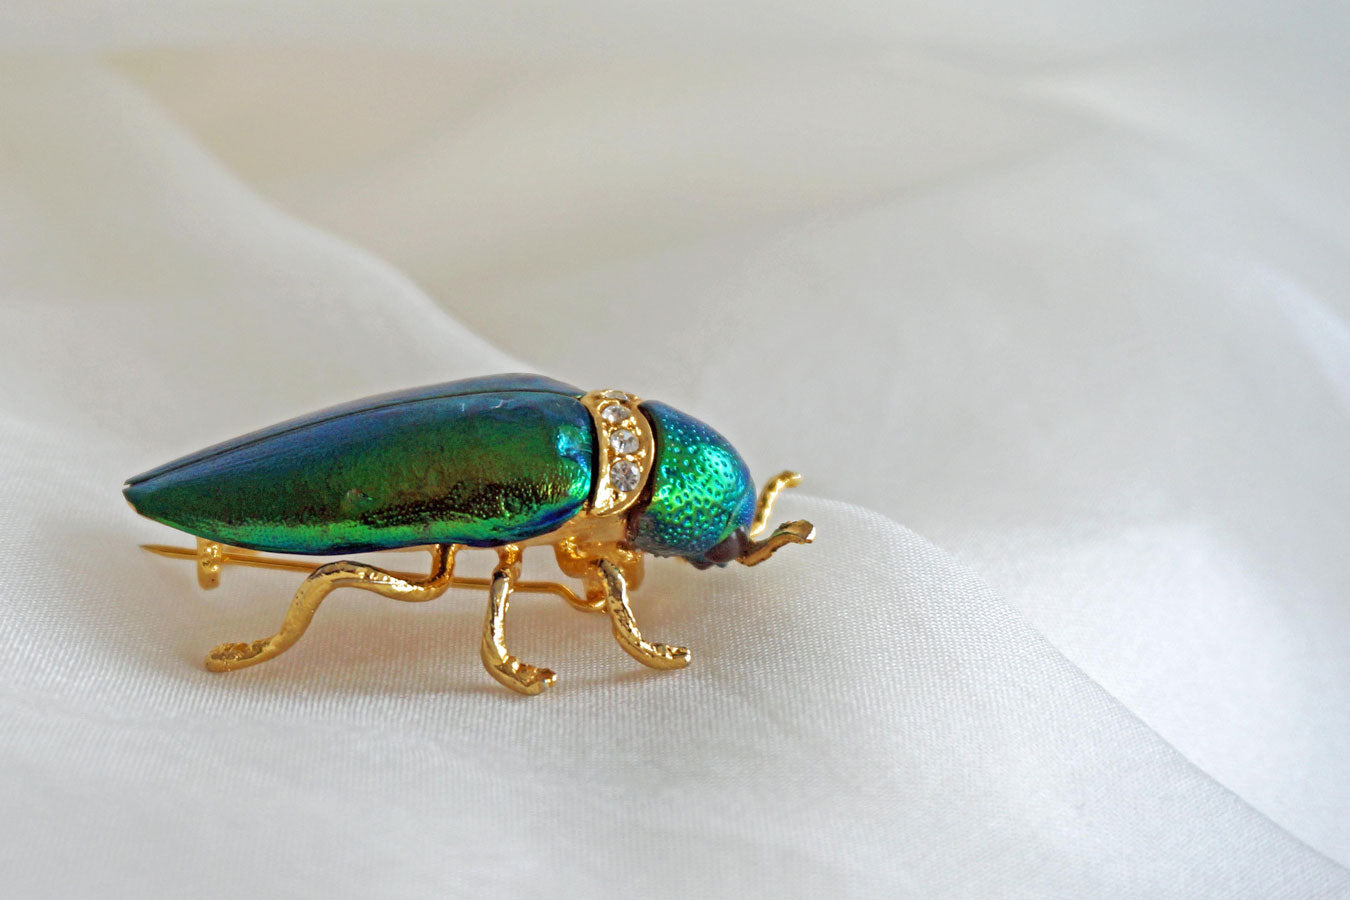 Vintage Iridescent Green Scarab Beetle Brooch, Green Beetle Pin Brooch Gift For Her - Ada's Attic Vintage- 6